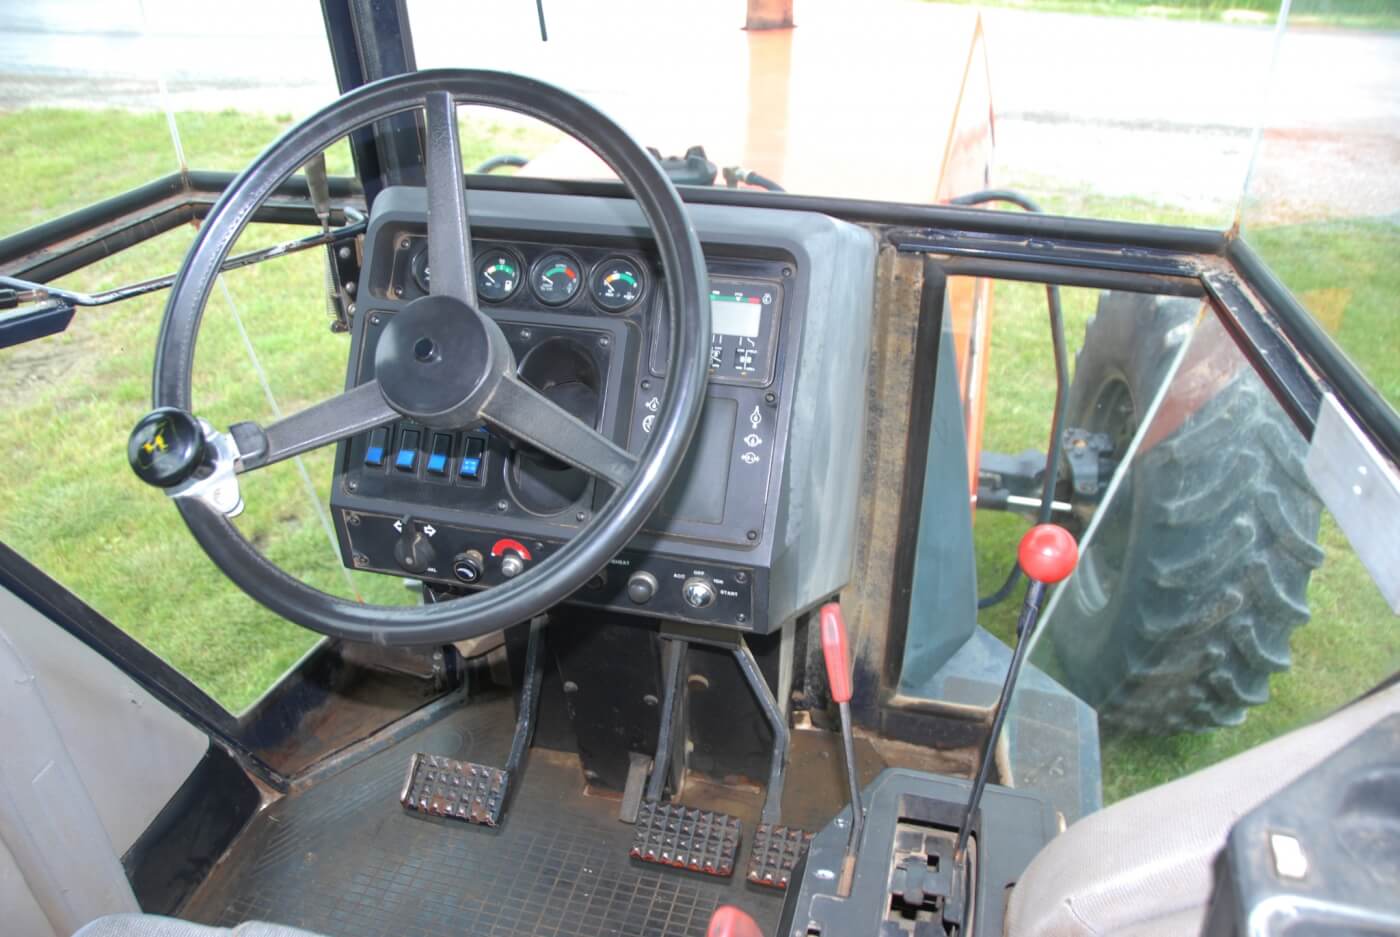 The control layout had a slightly Euro flair to it but still was comprehensible to American farmers. Some of the KHD-built tractors didn’t have that quality. The 9190 was in the upper tier of operator comfort and can still hold its own in that regard.